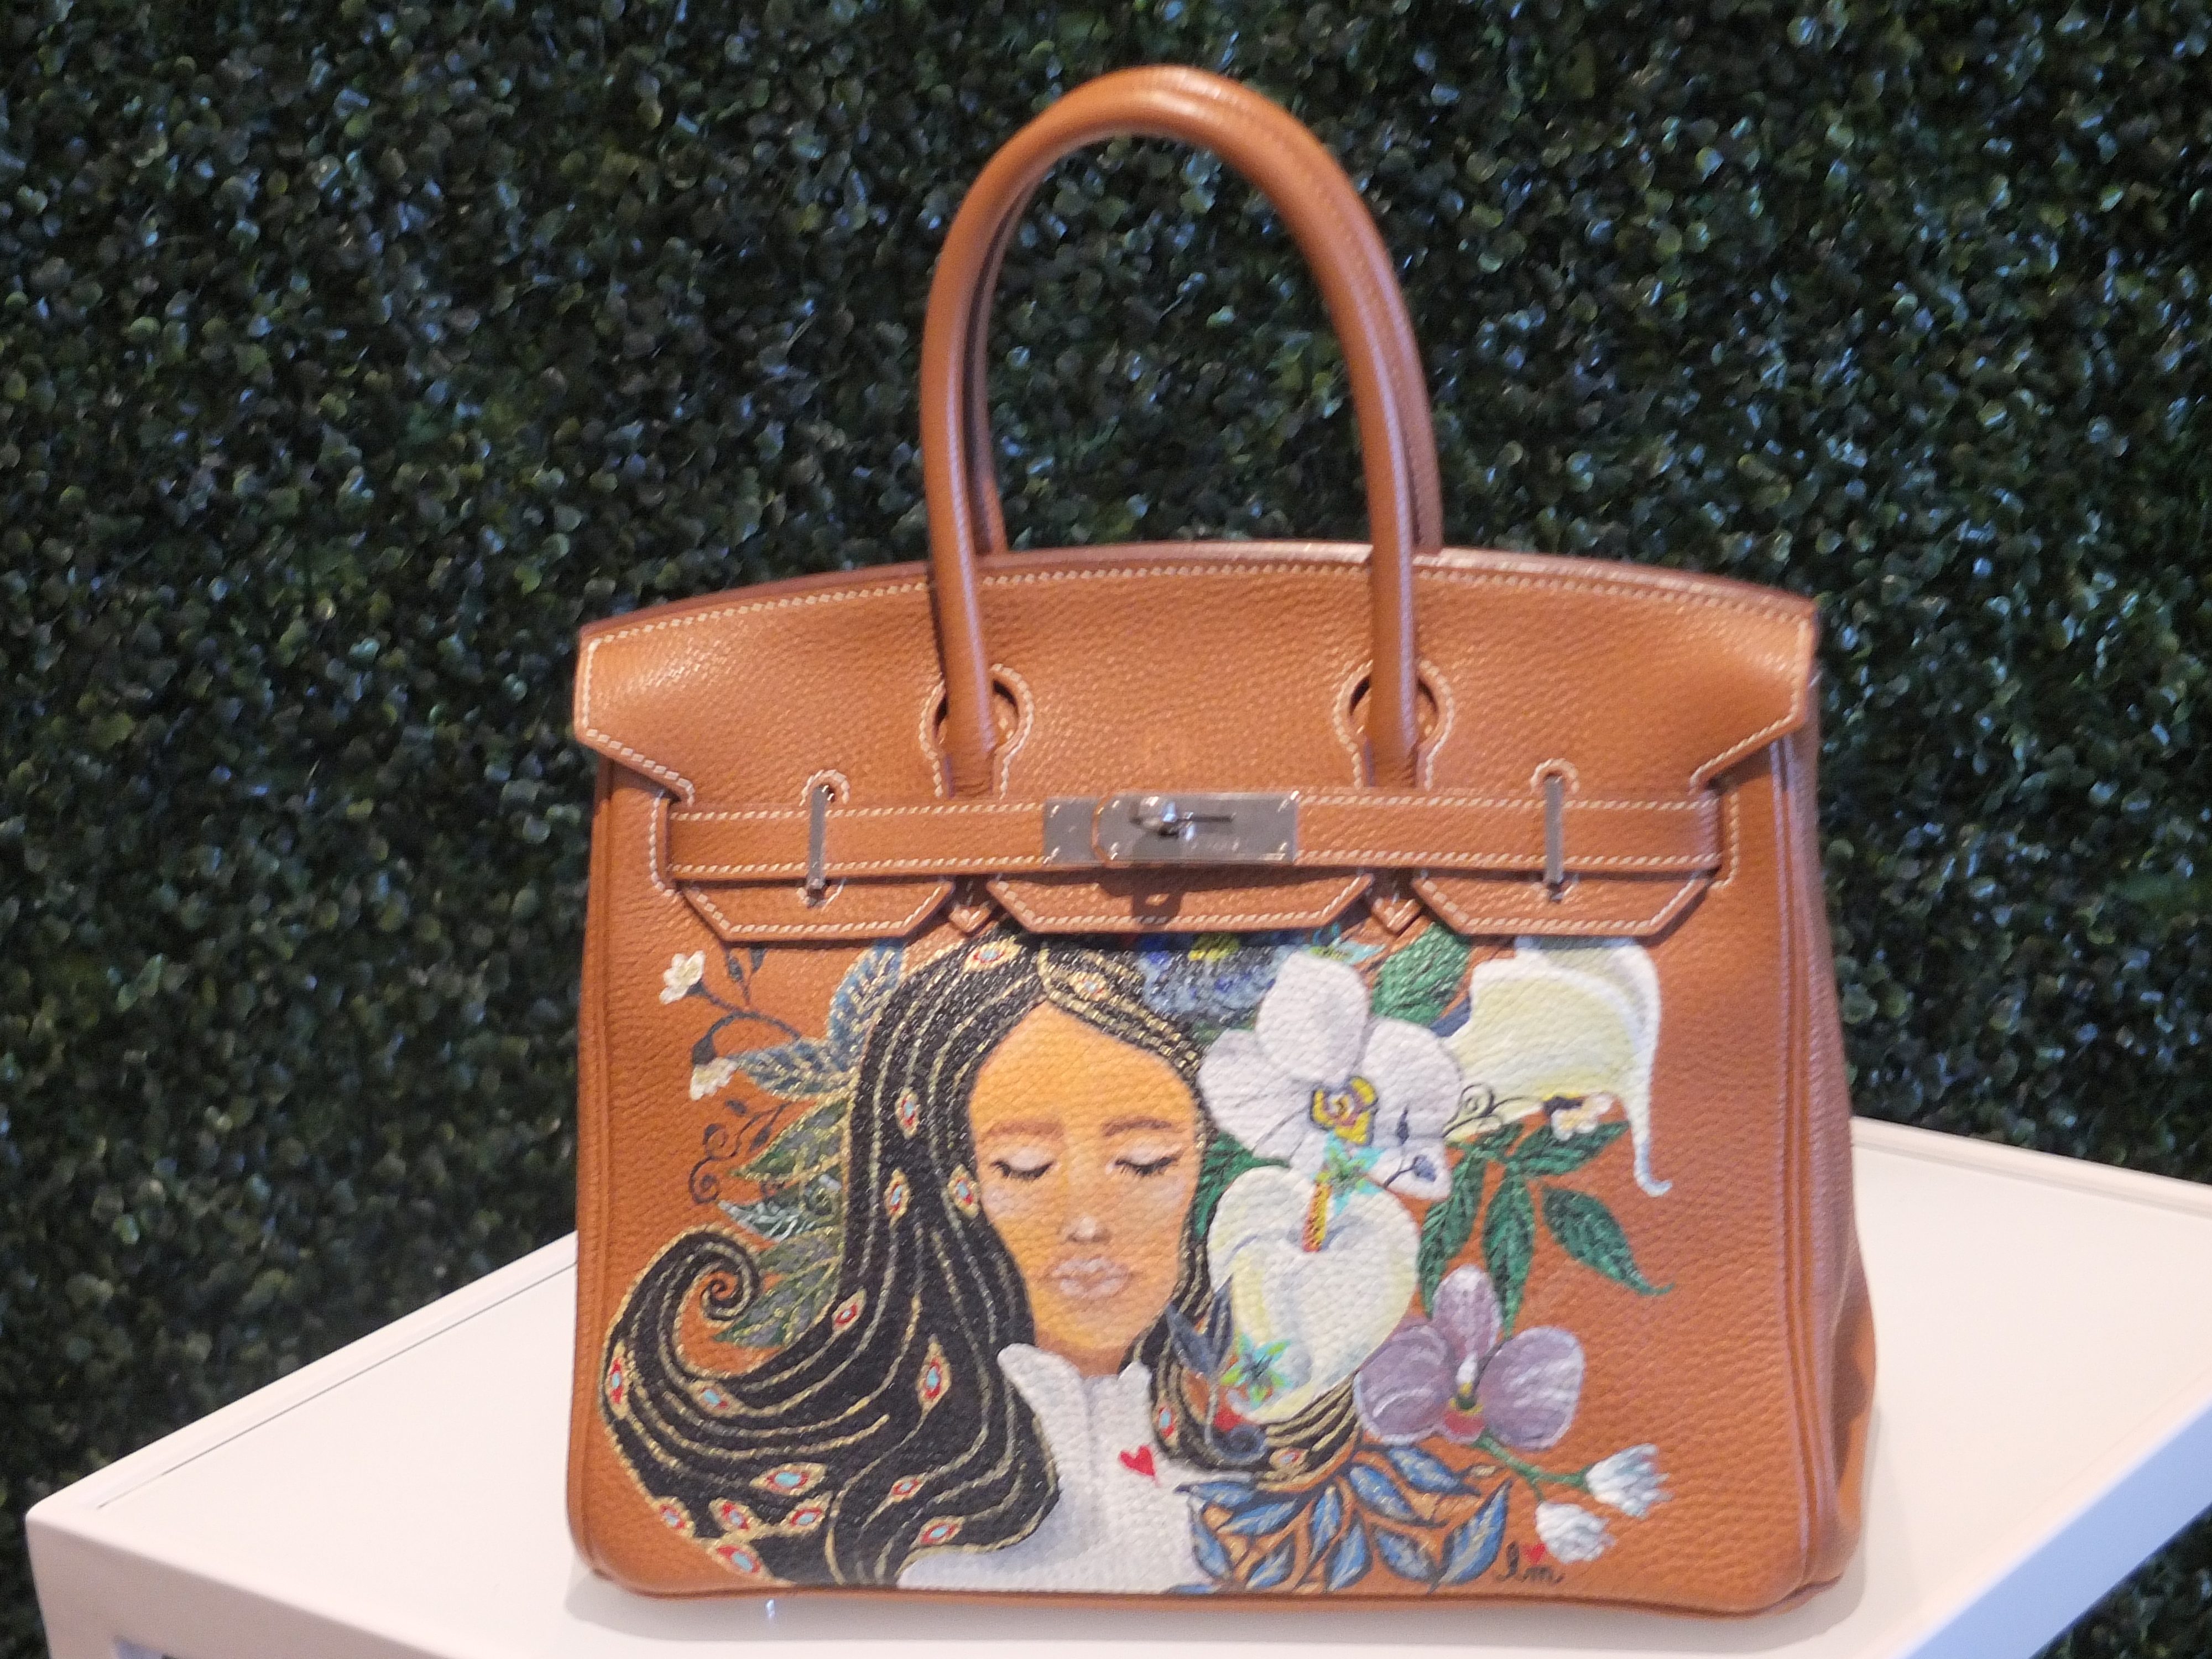 Heart Evangelista Paint On Birkin Handbags for Clients REACTION (It's a  fascinating moment) 😲🔥🔮☎ 